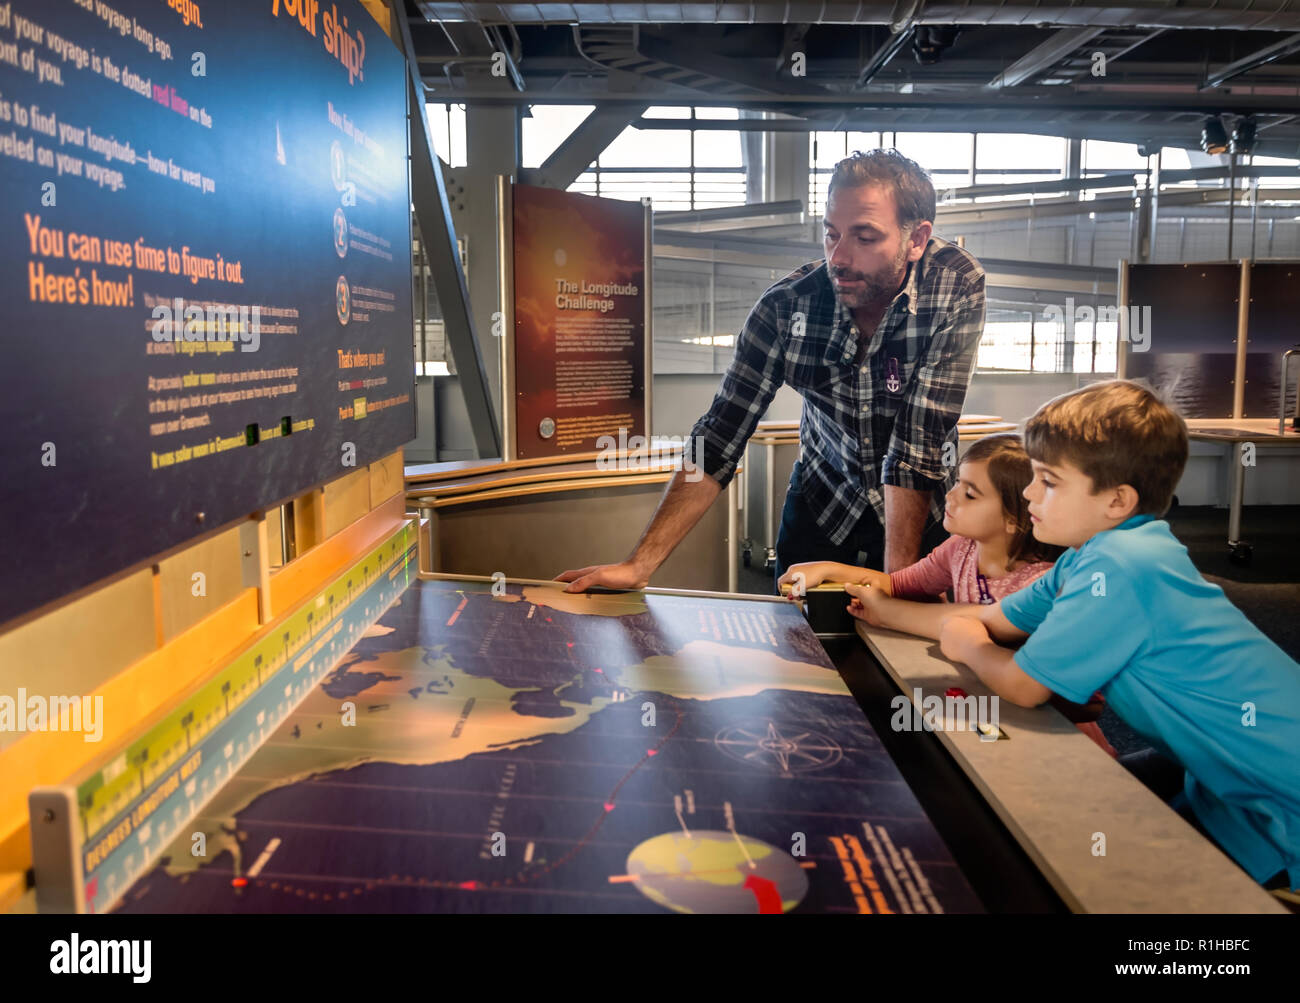 A father helps his children as they explore an interactive exhibit at GulfQuest National Maritime Museum of the Gulf of Mexico,  November 27, 2015, in Stock Photo